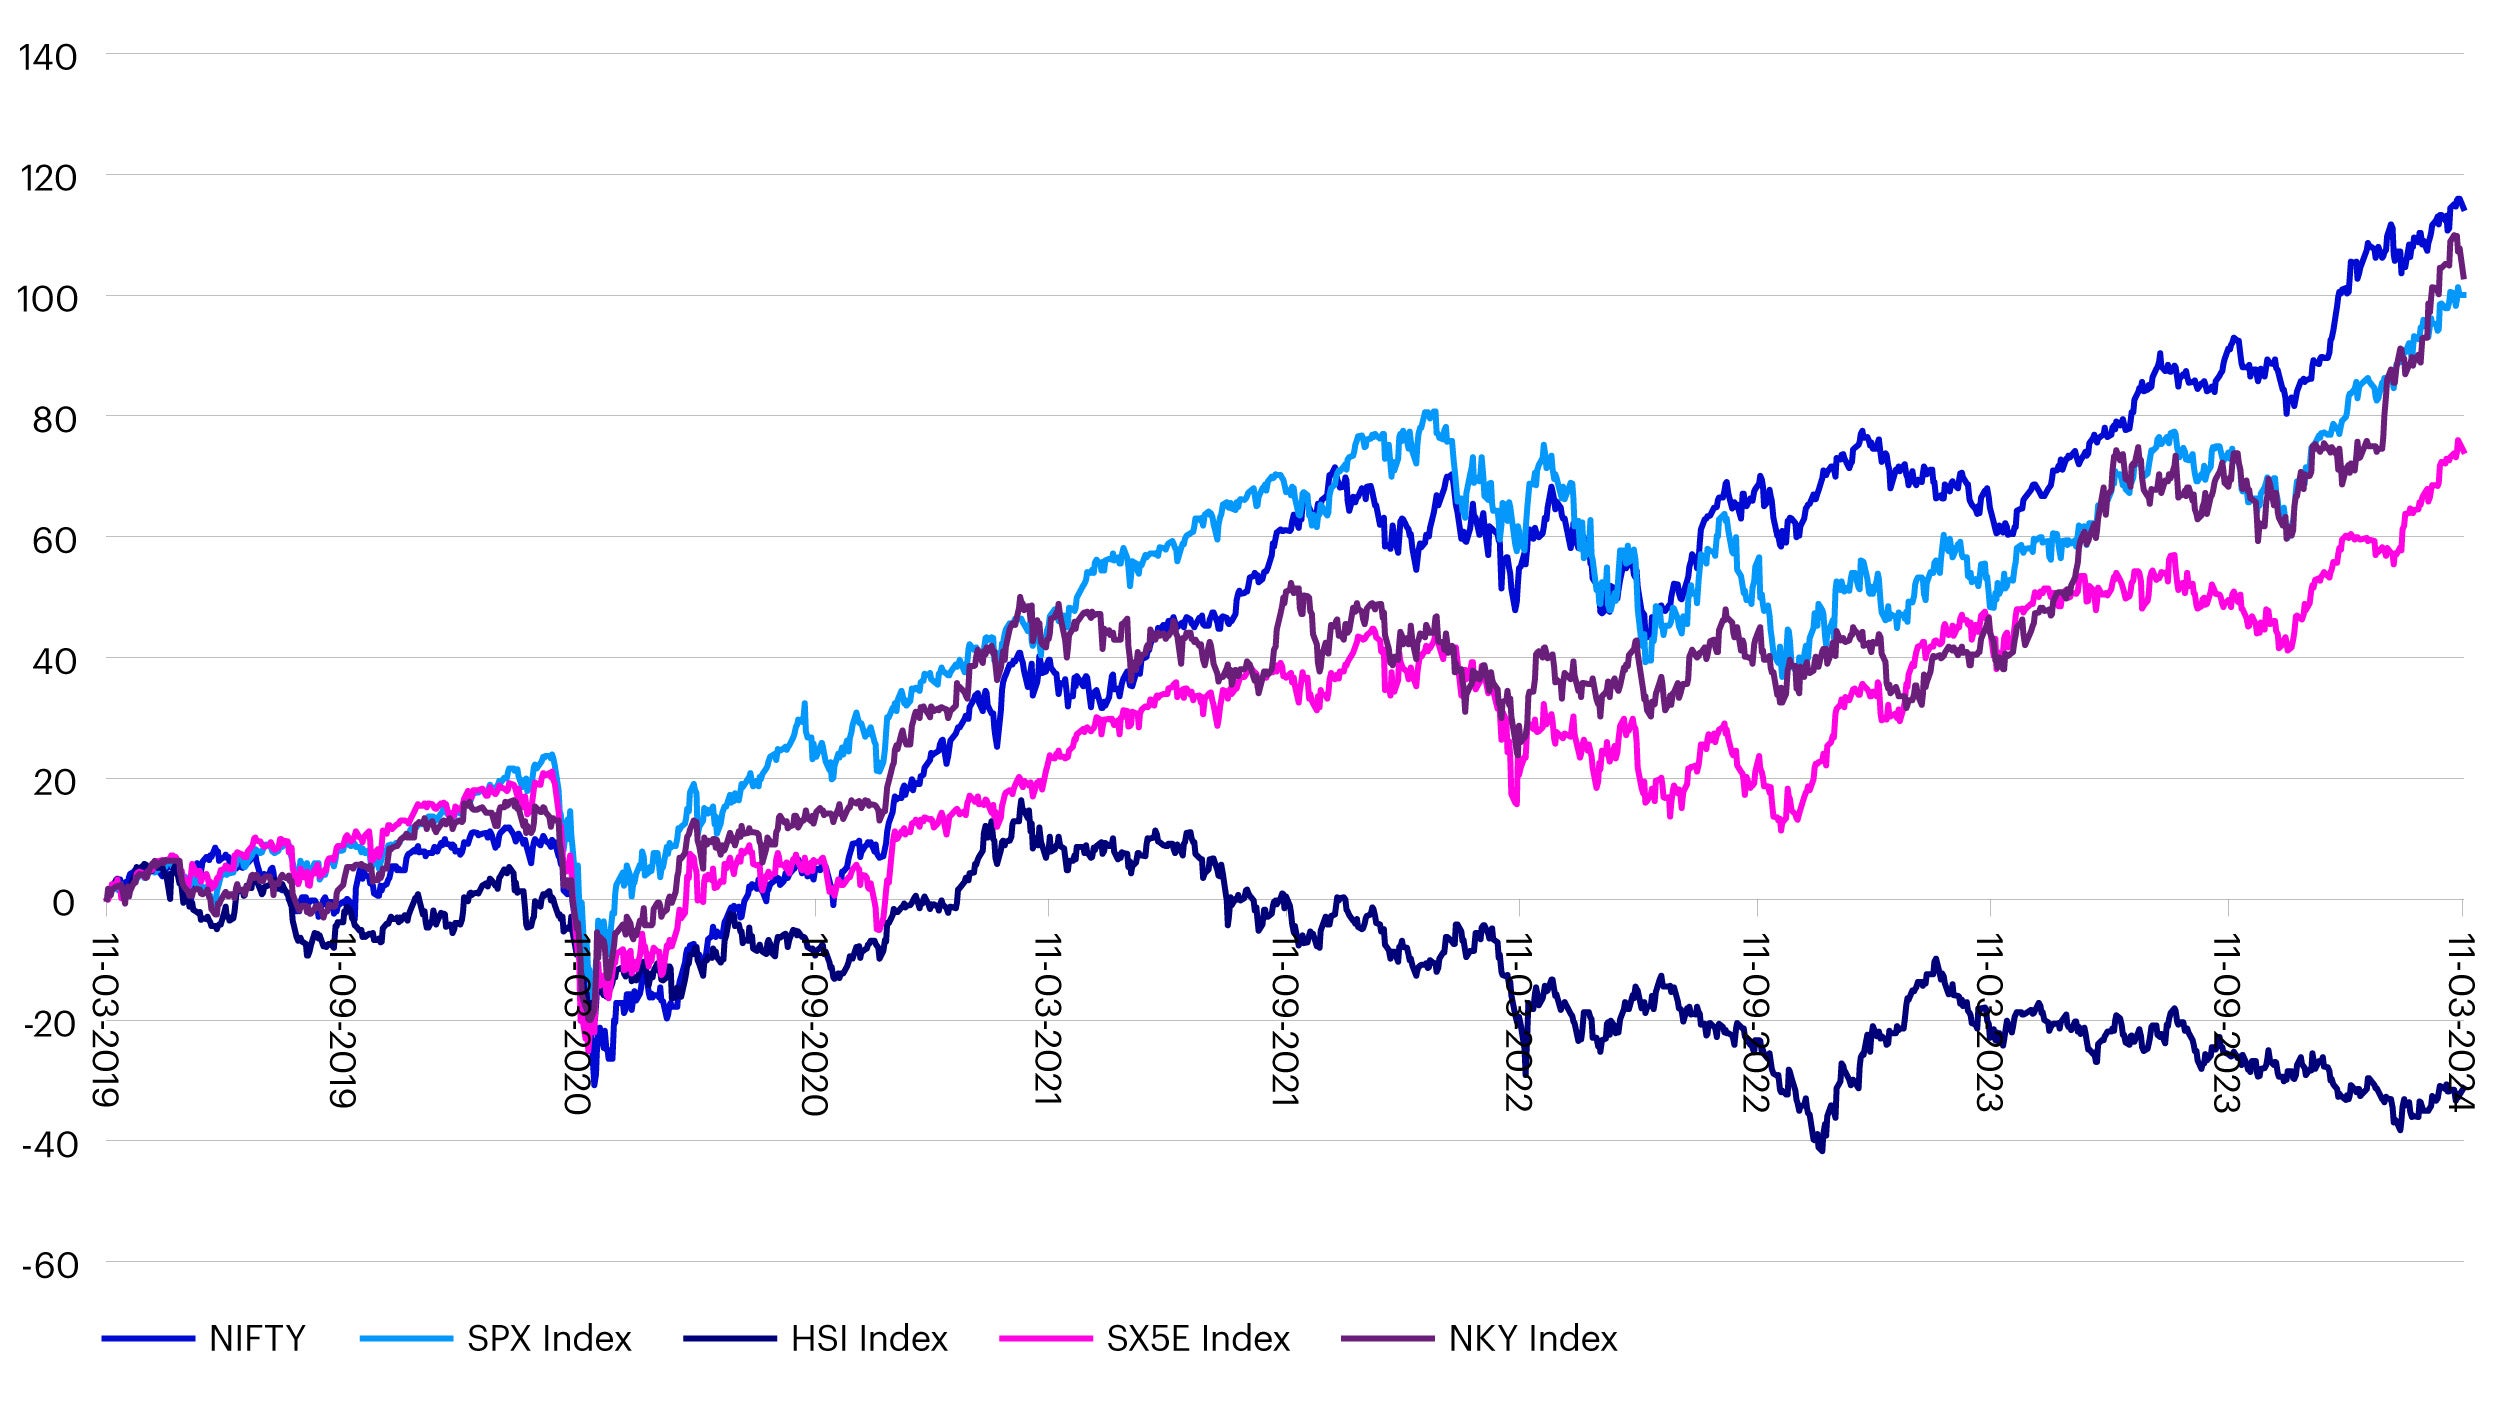 Figure 6 - NIFTY 50 Index performance relative to major market indices (5-year basis) 